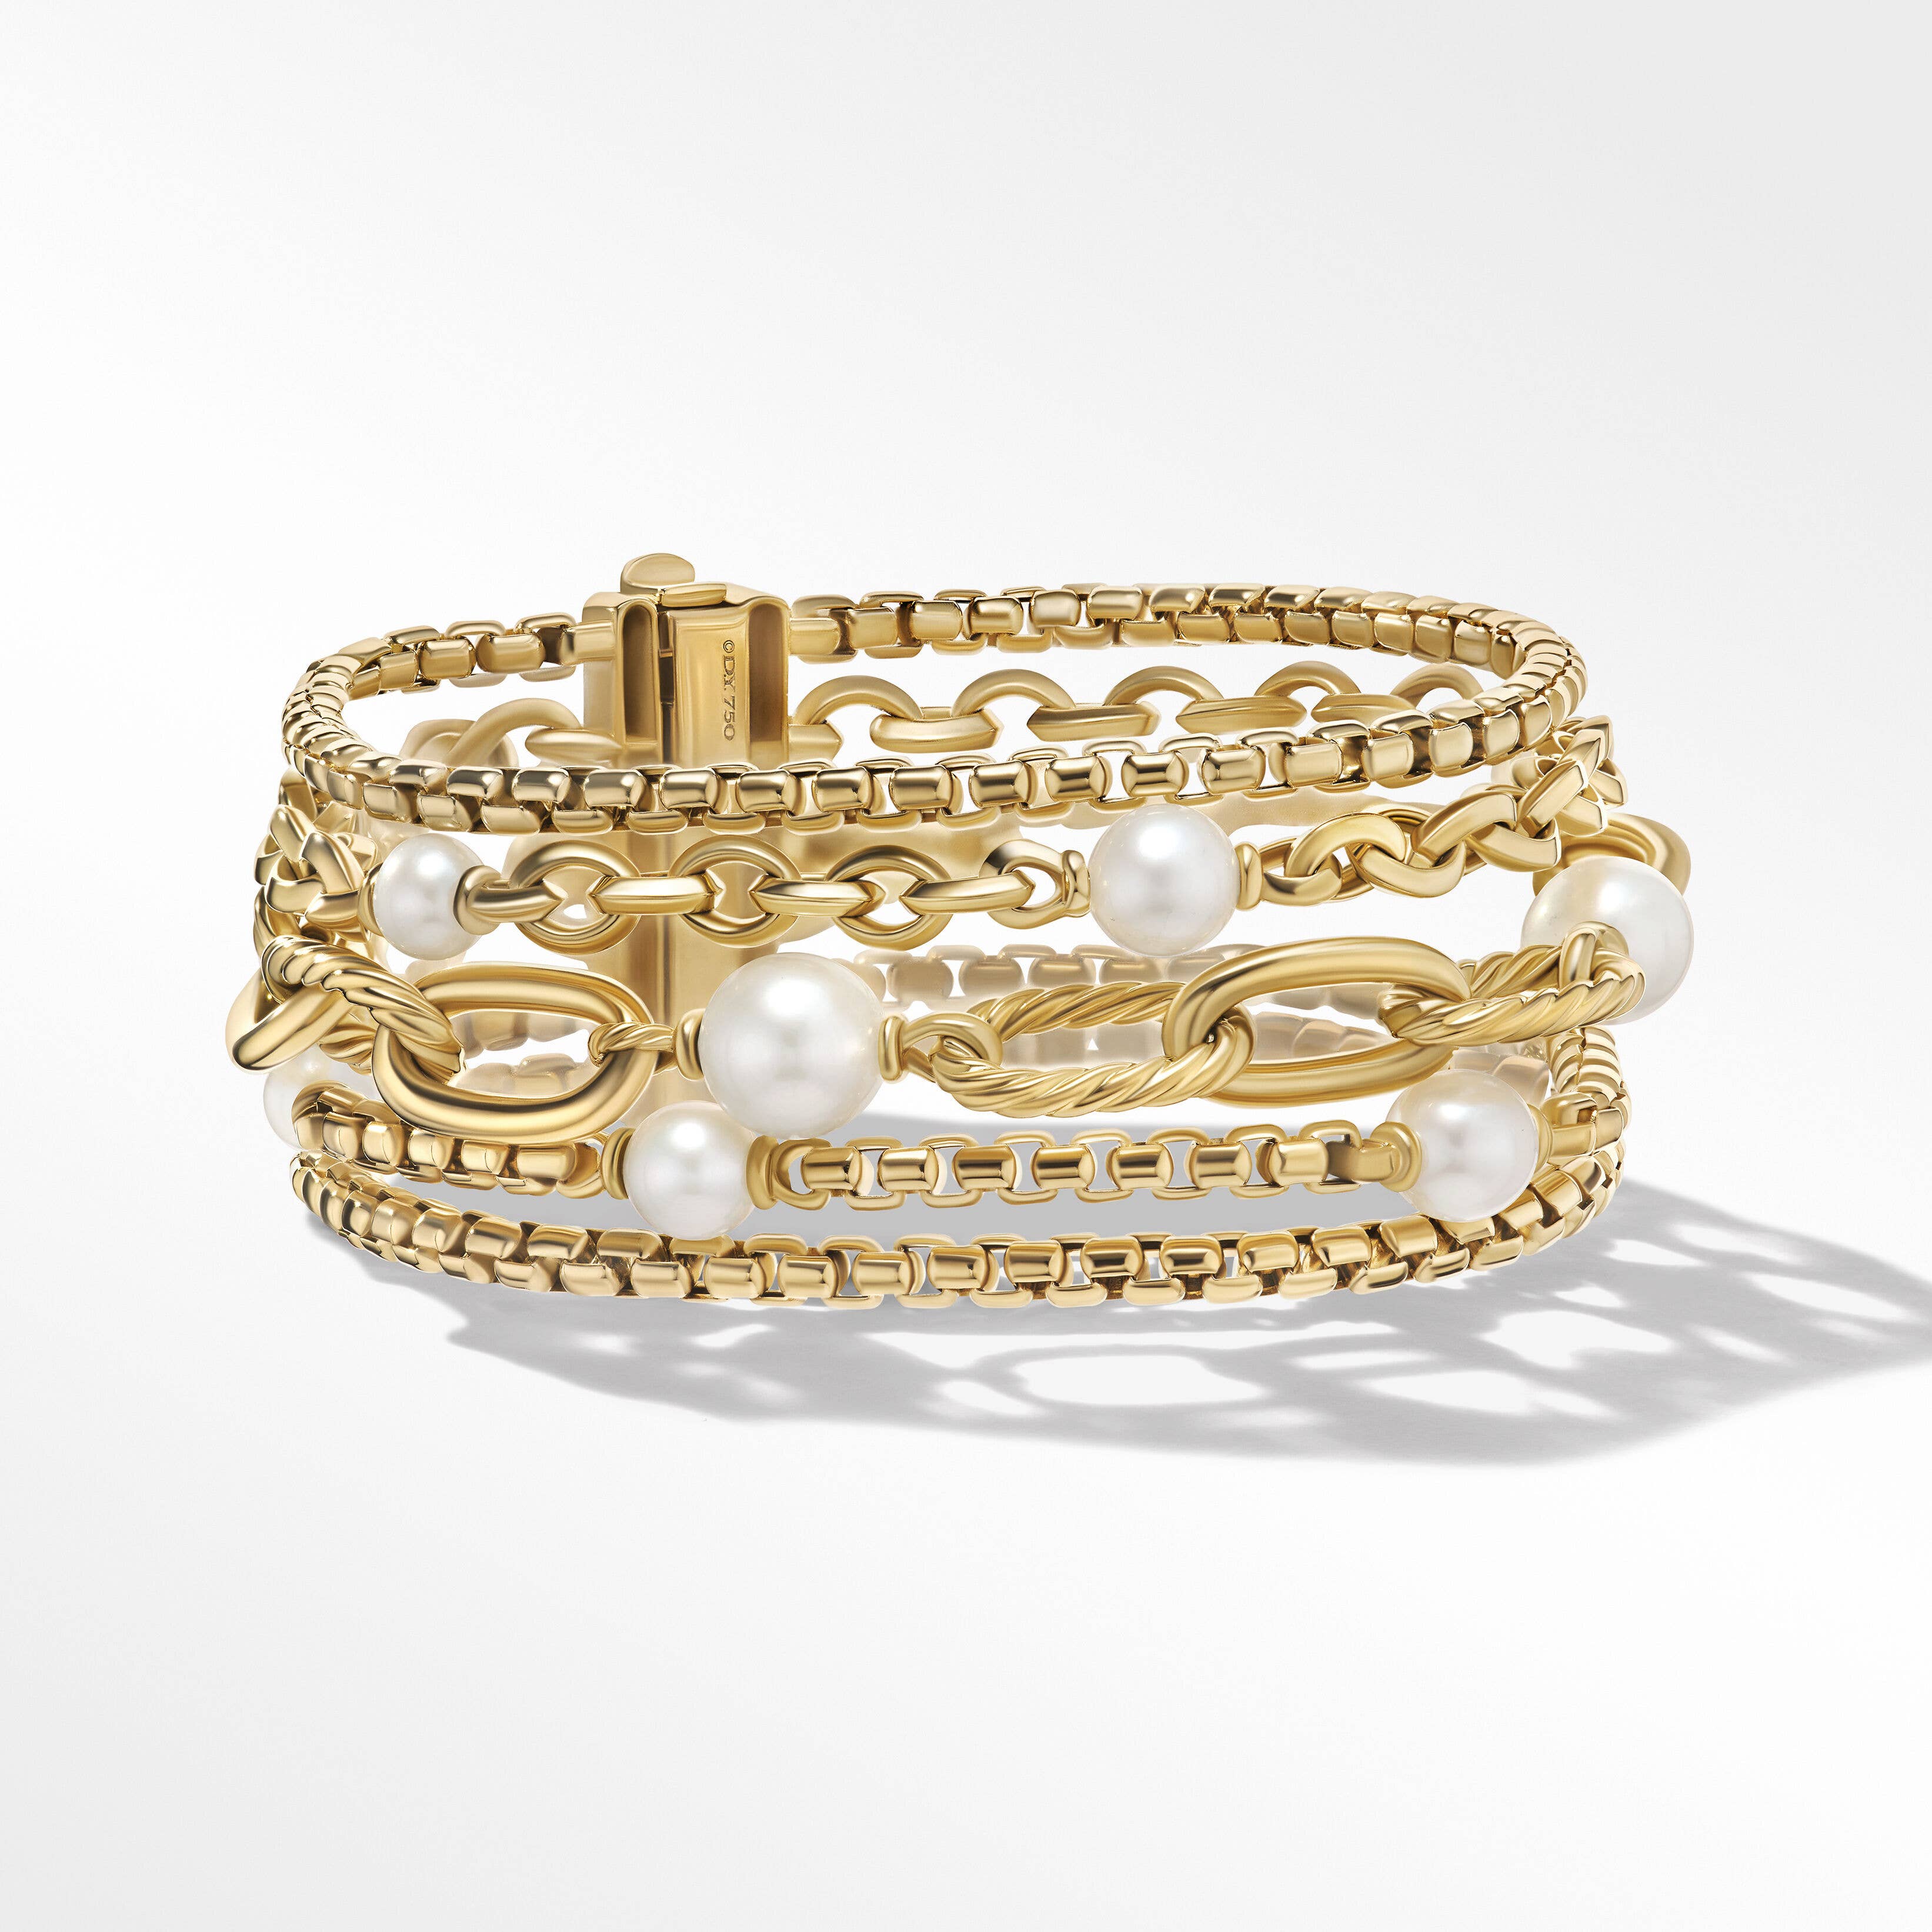 DY Madison Pearl Multi Row Chain Bracelet in 18K Yellow Gold